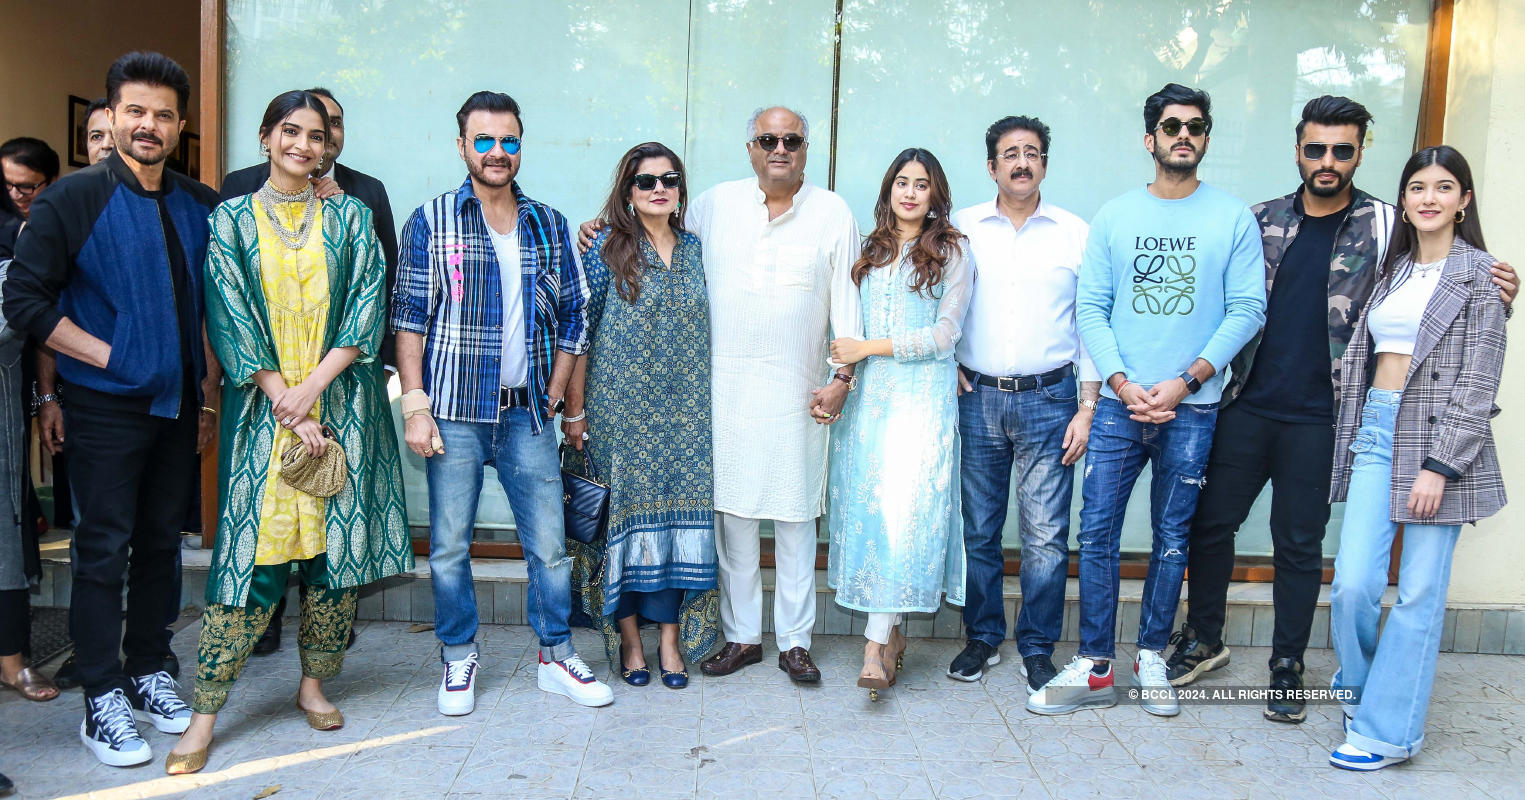 Kapoor family comes together to unveil chowk named after Surinder Kapoor